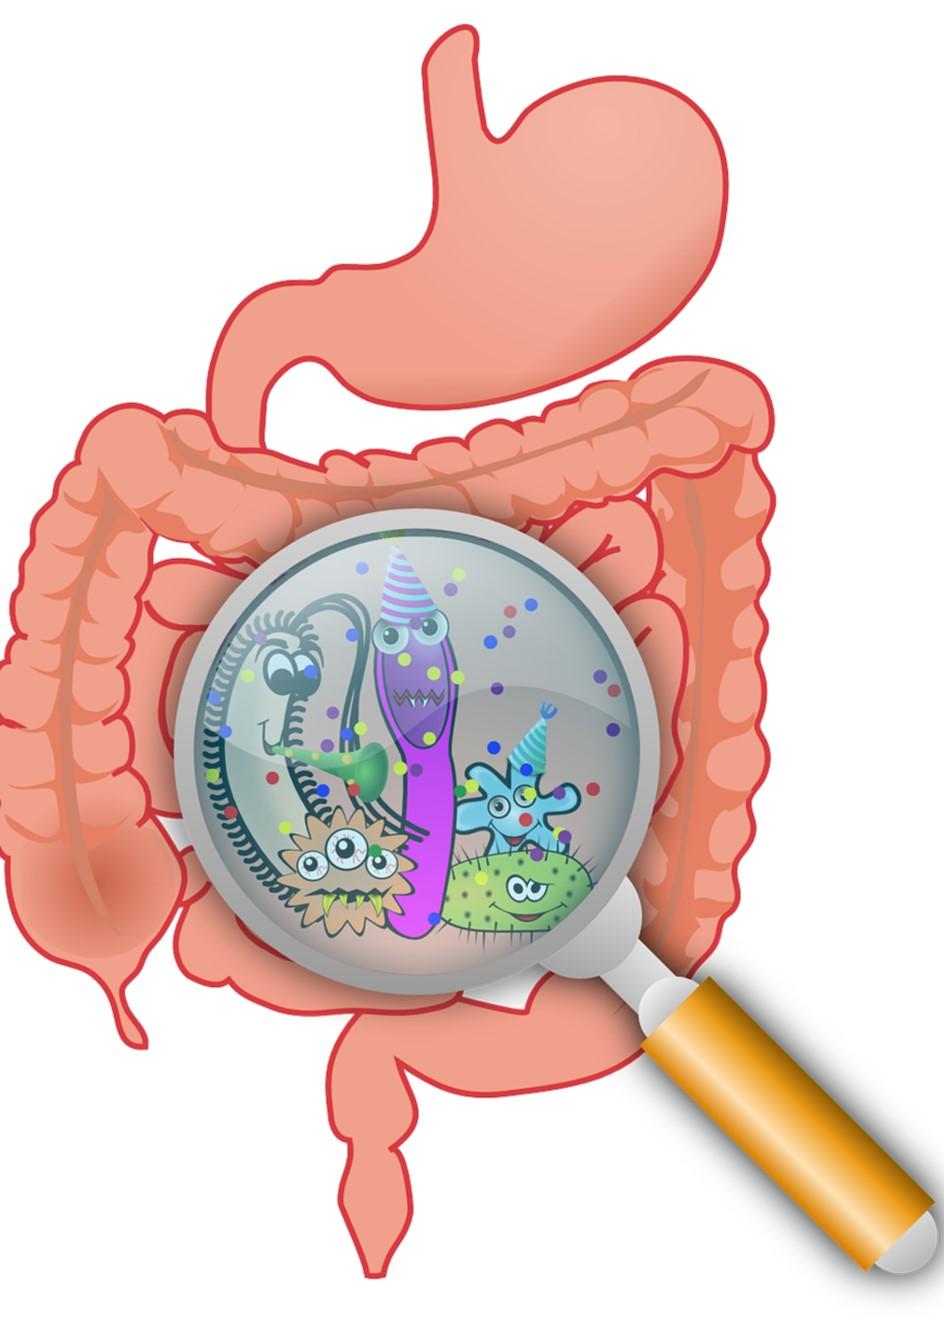 Illustration of the digestive system, with a focus on the small intestines. The small intestines are populated by cartoon bacteria that are visible through a magnifying glass. 